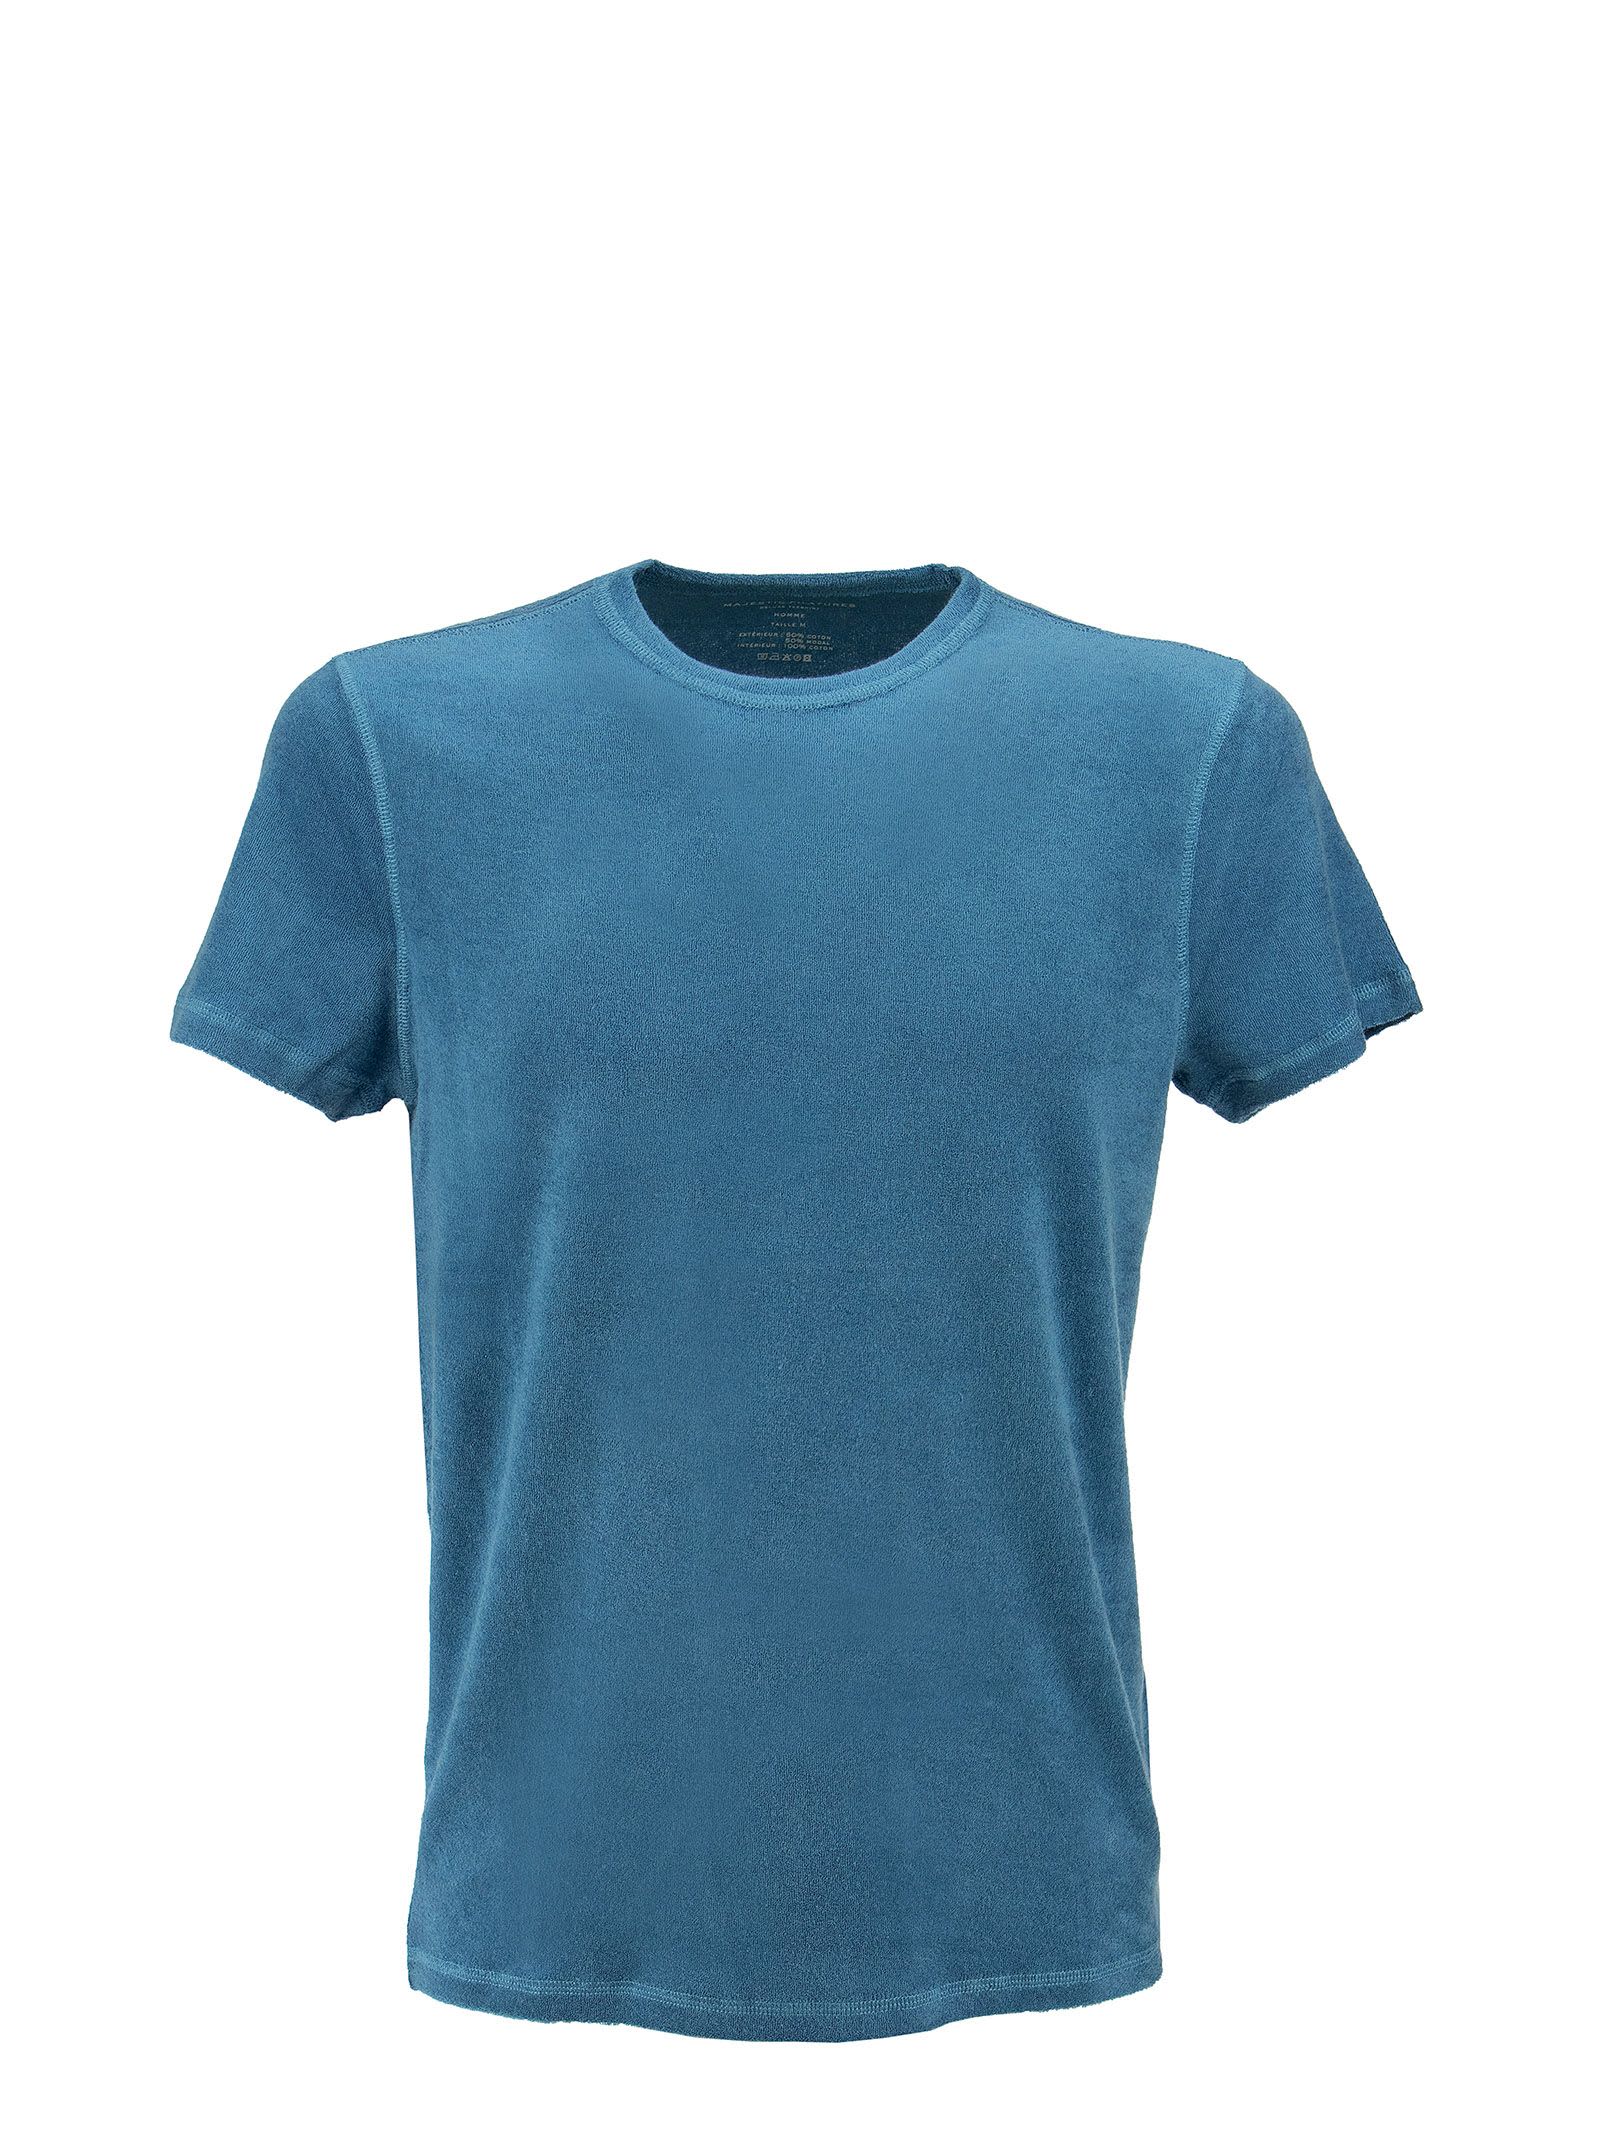 Majestic Filatures Cotton And Modal T-shirt